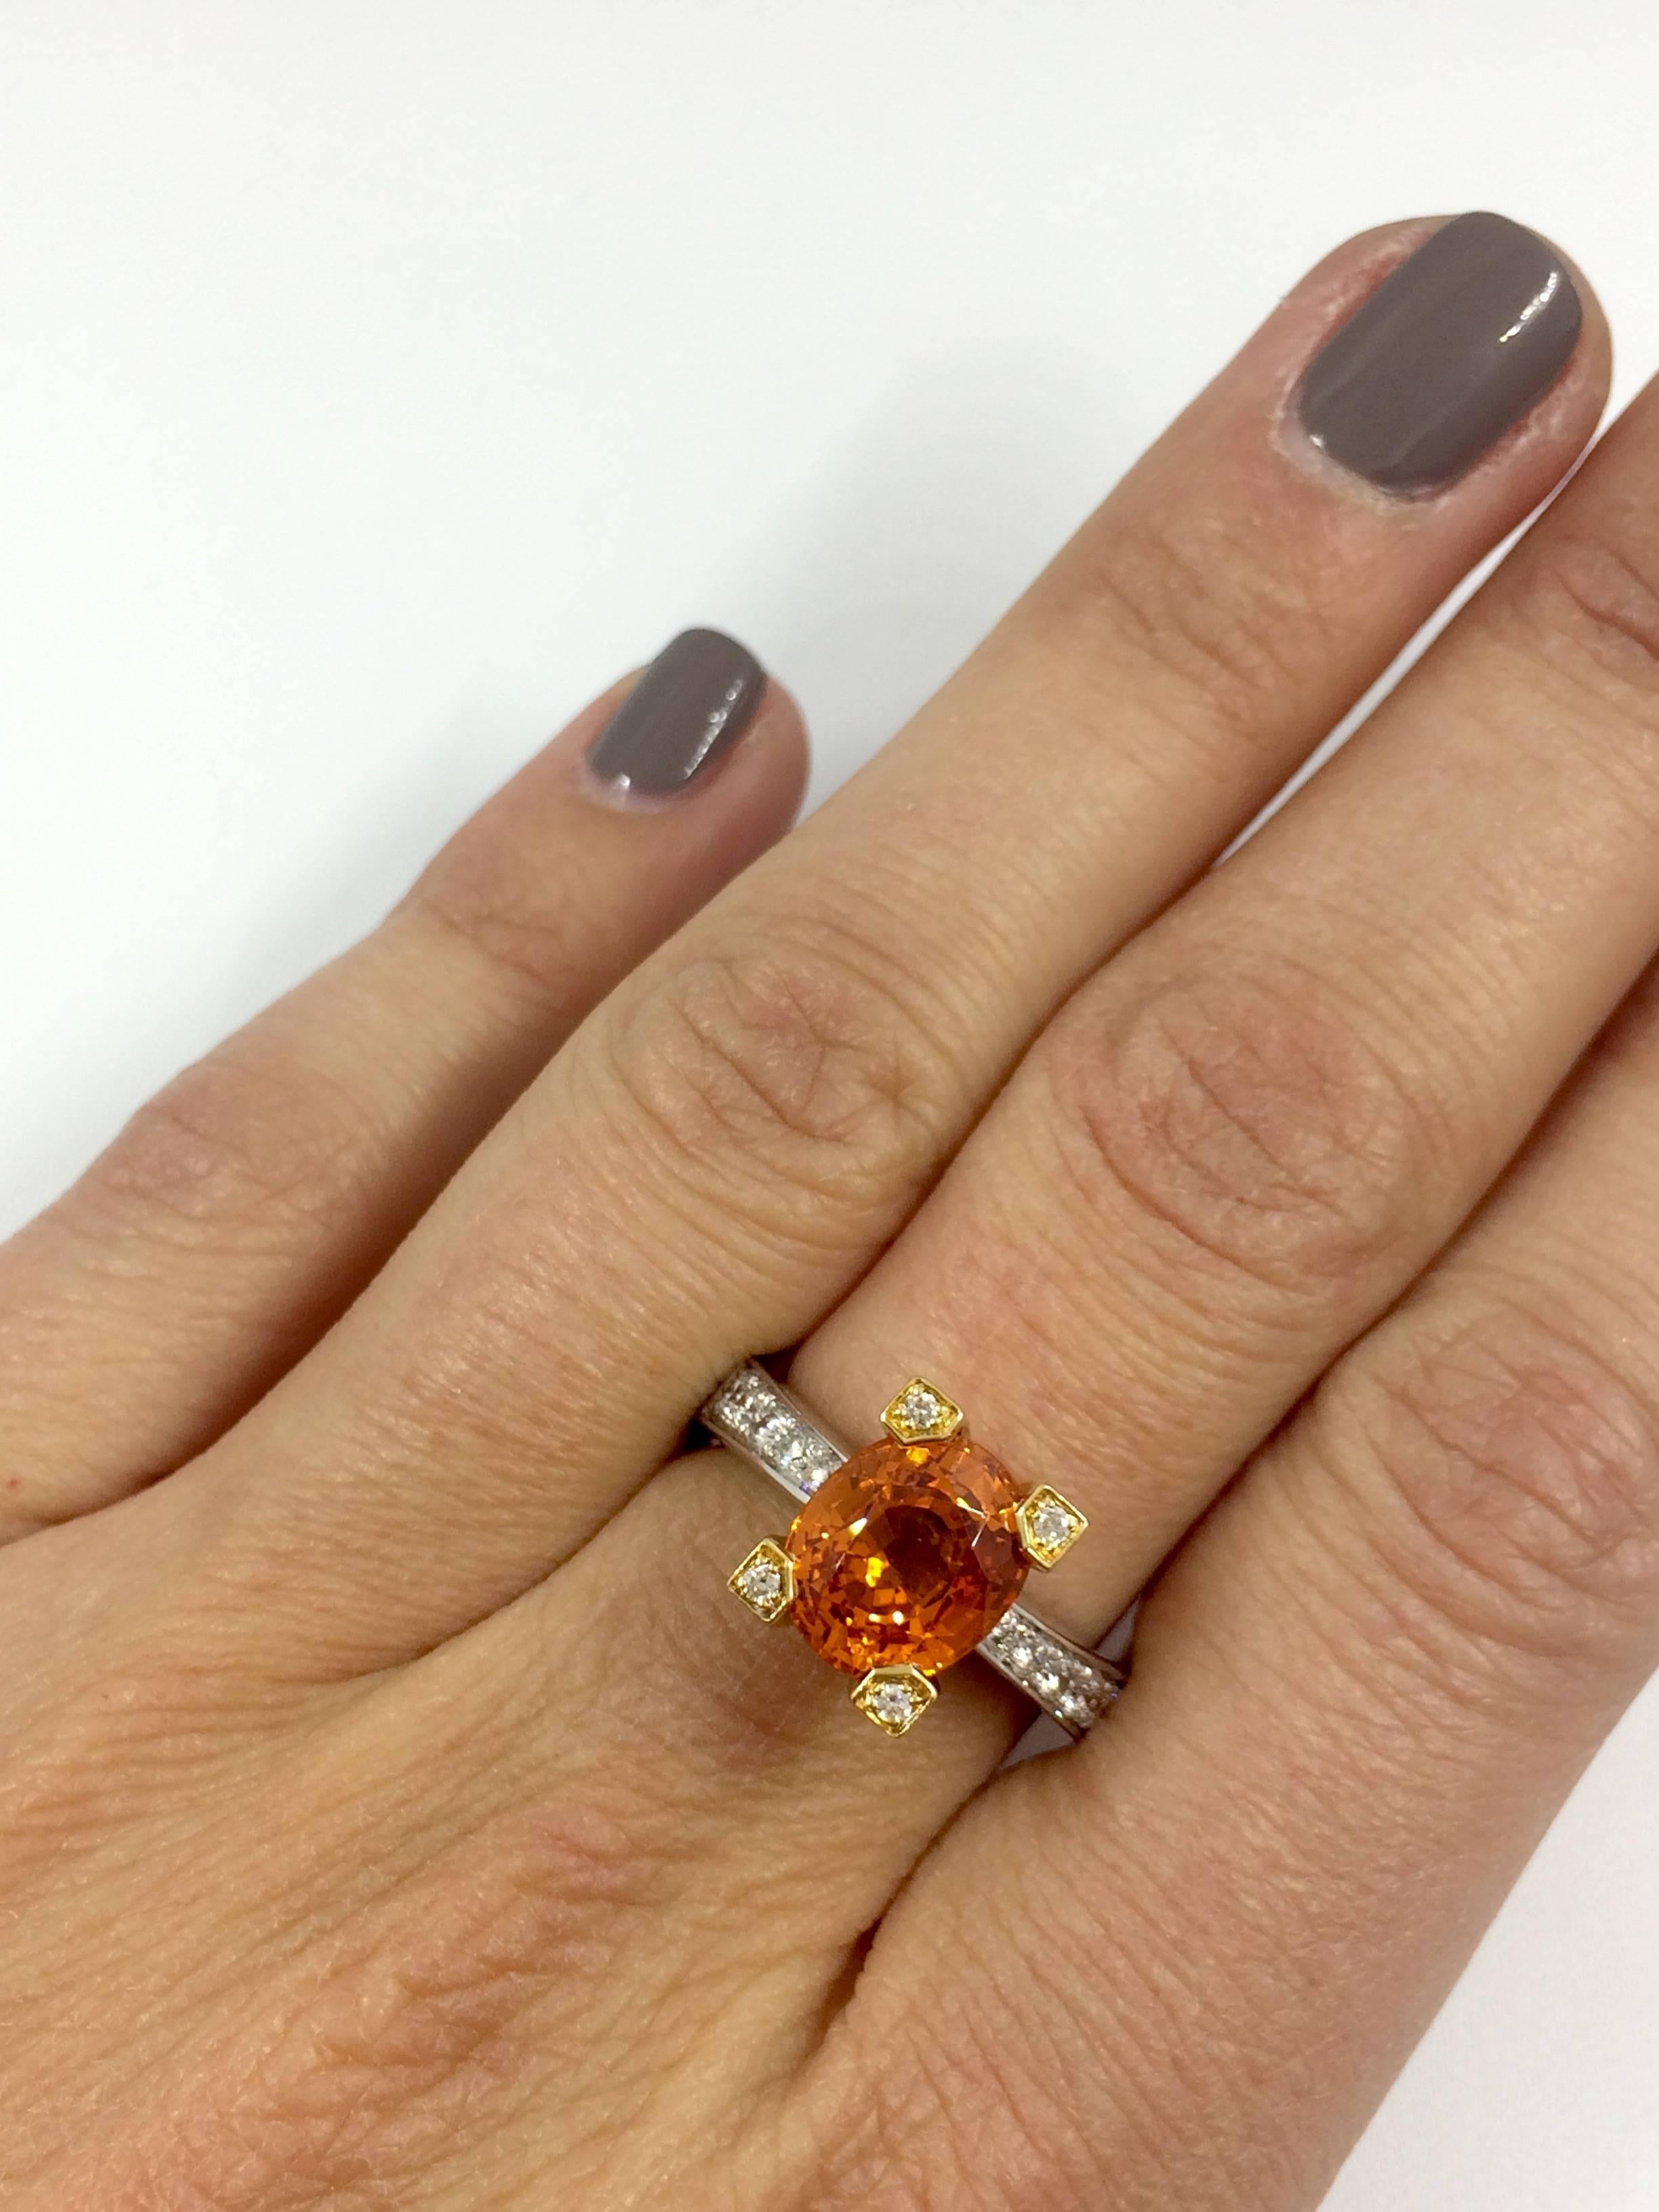 A white and yellow gold ring set in the middle with an orange garnet (spessartite) surrounded by 10 brilliants cut diamonds set on the body's ring.
As well as four brilliant cut diamonds are setted on the claws. 
The ring is entirely